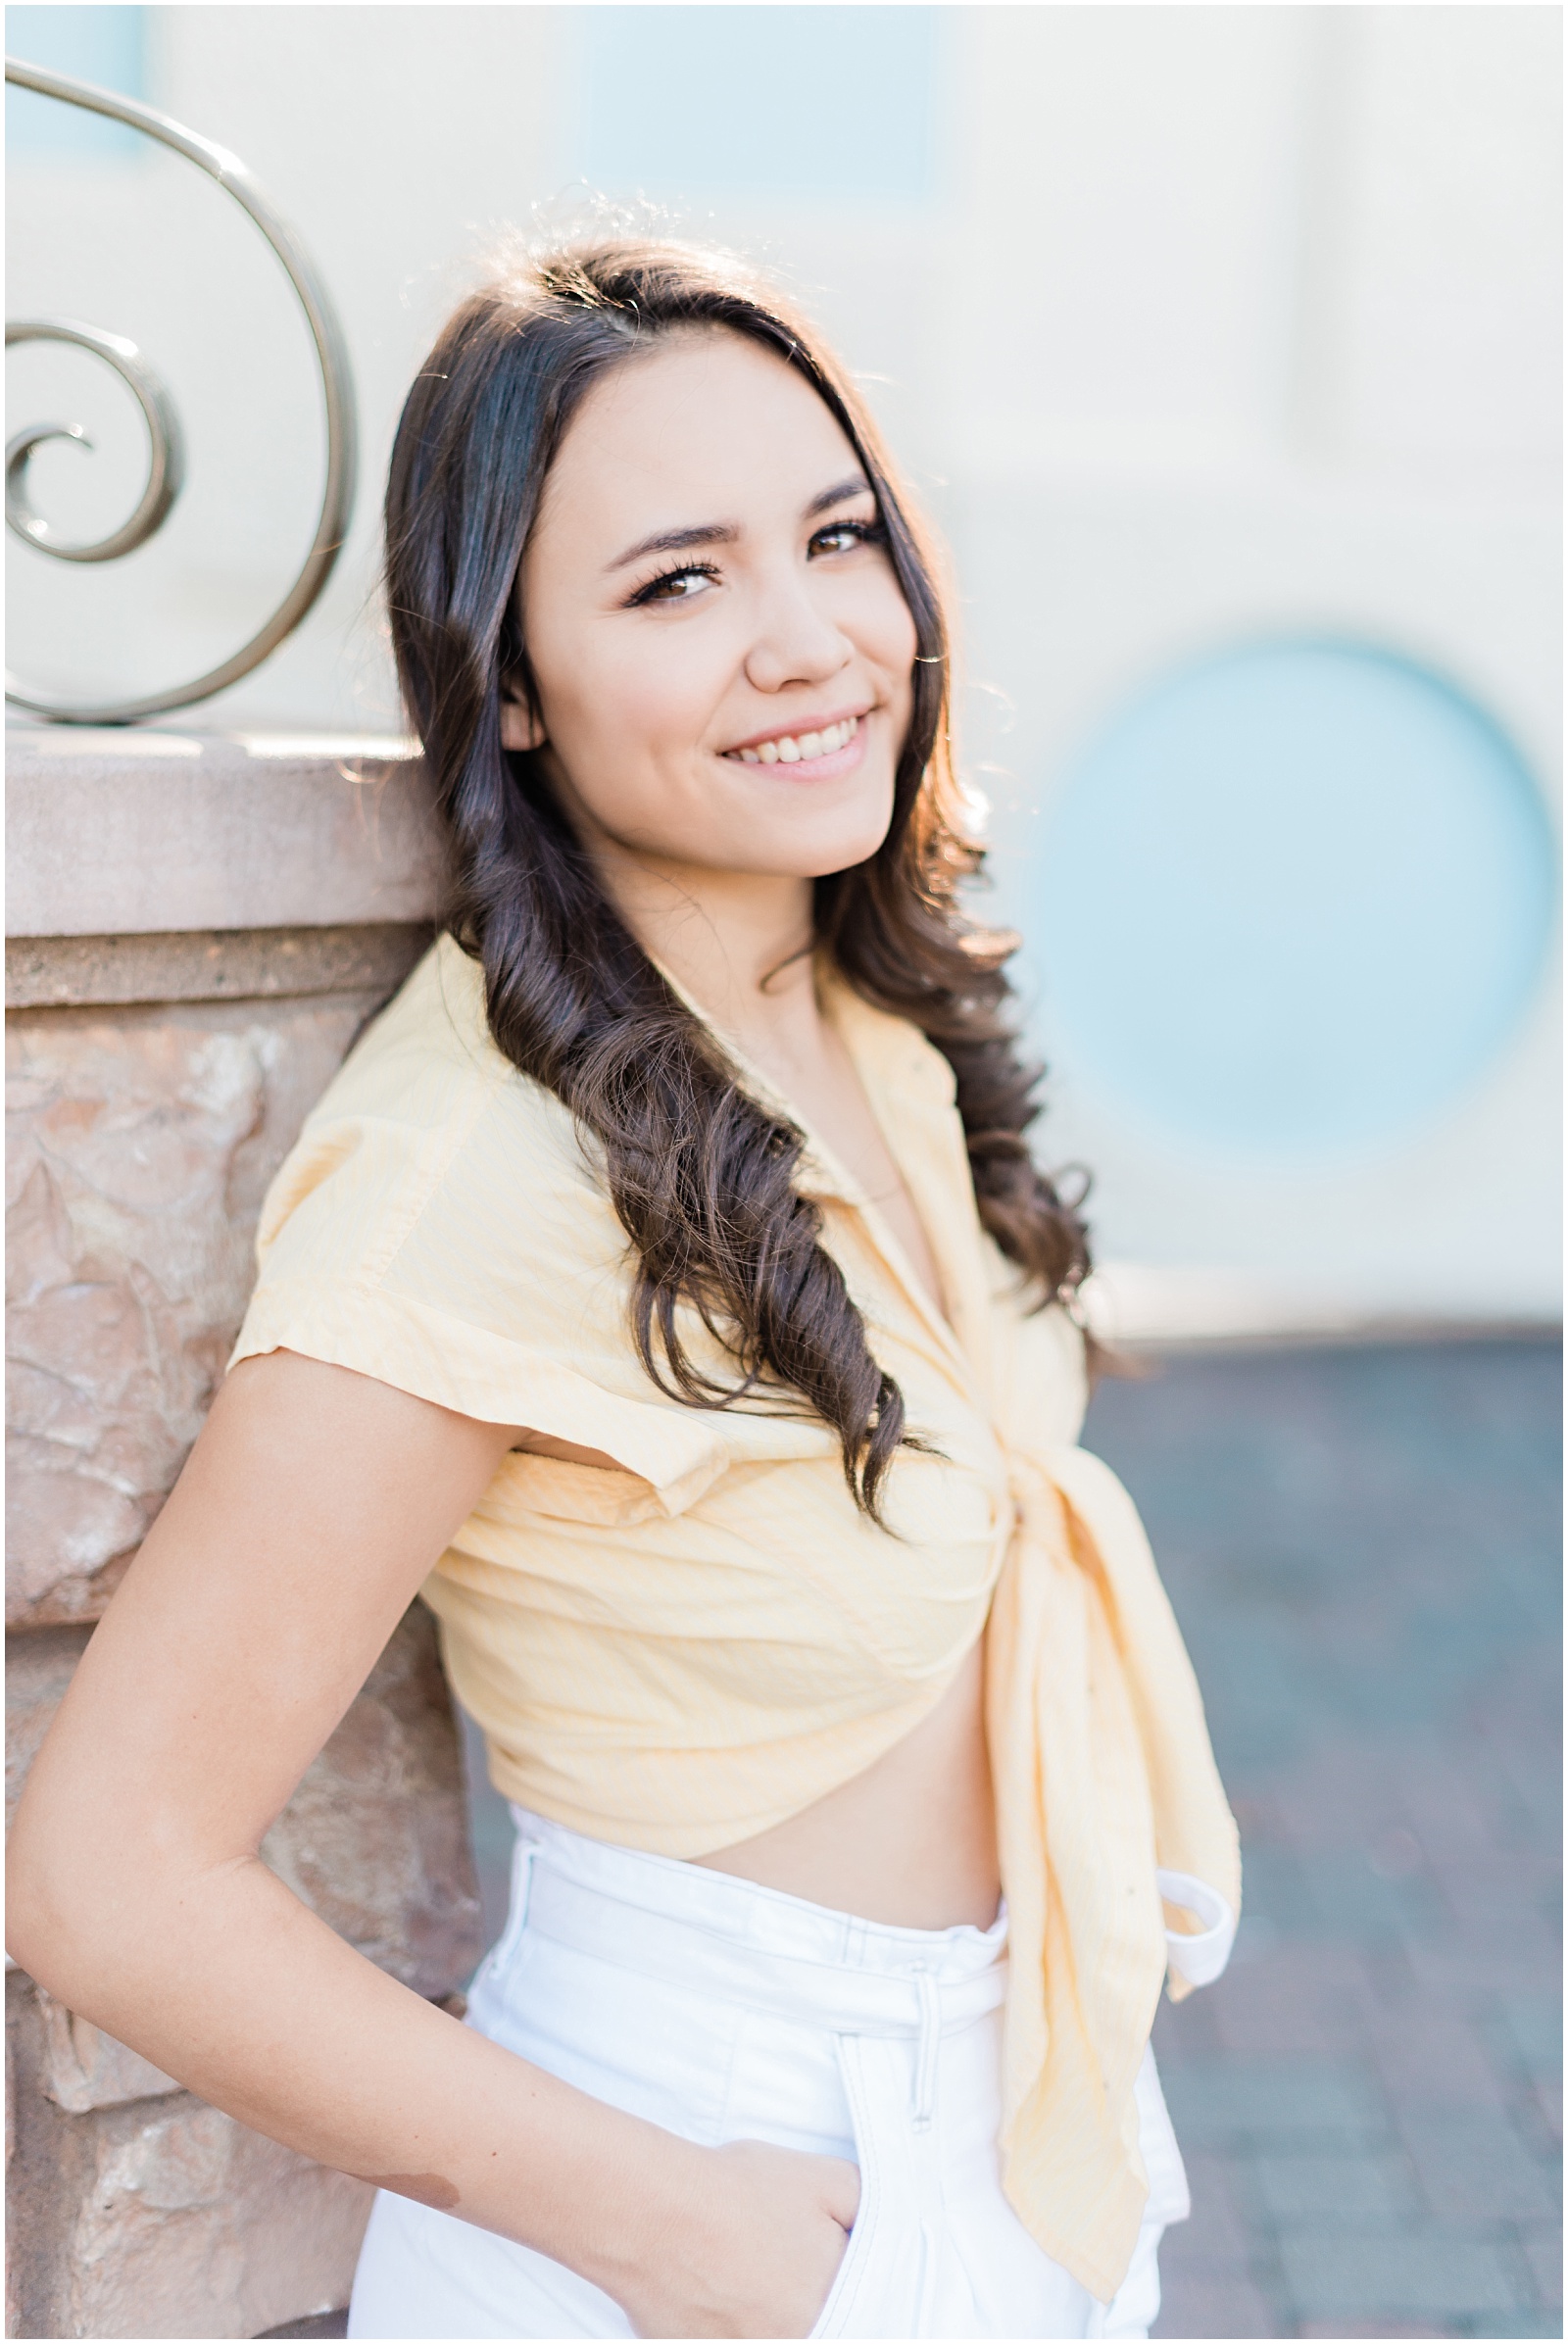 Disneyland Fantasyland Senior Session.Images by Mollie Jane Photography. To see more go to www.molliejanephotography.com.